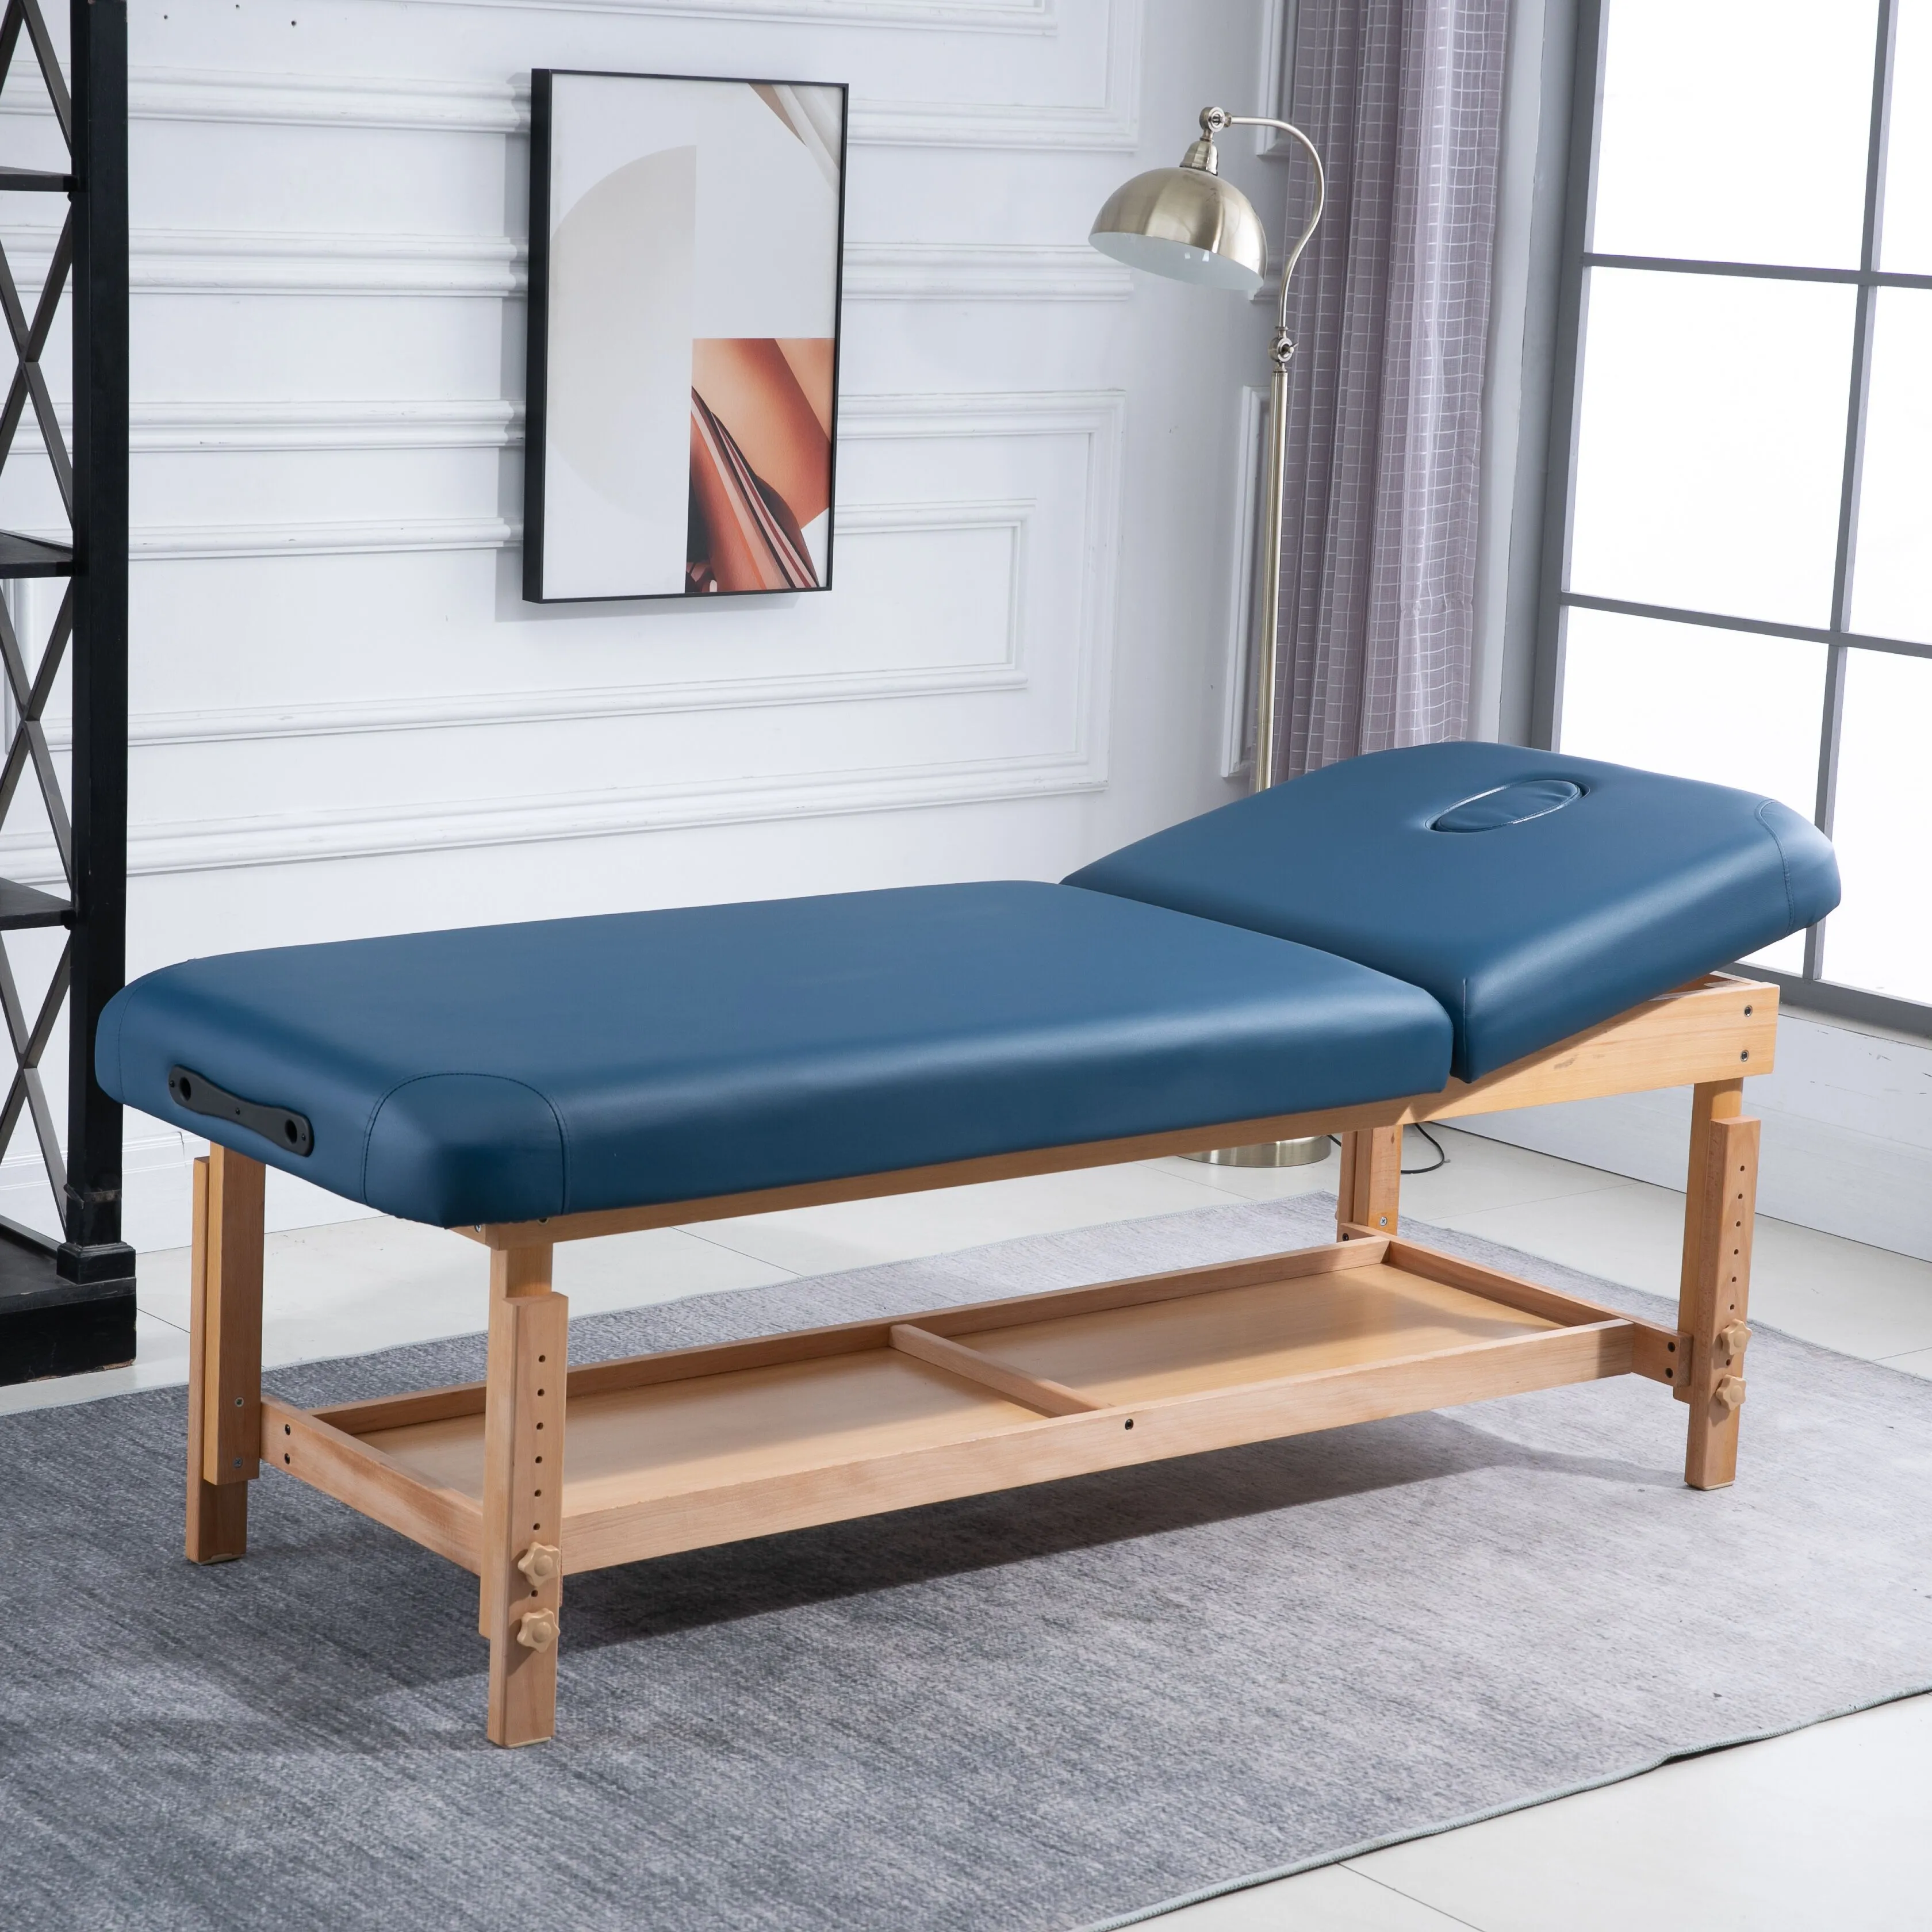 Spa Bed Beauty Salon Spa Tattoo Bed Beauty Salon Physical Therapy Massage Bed